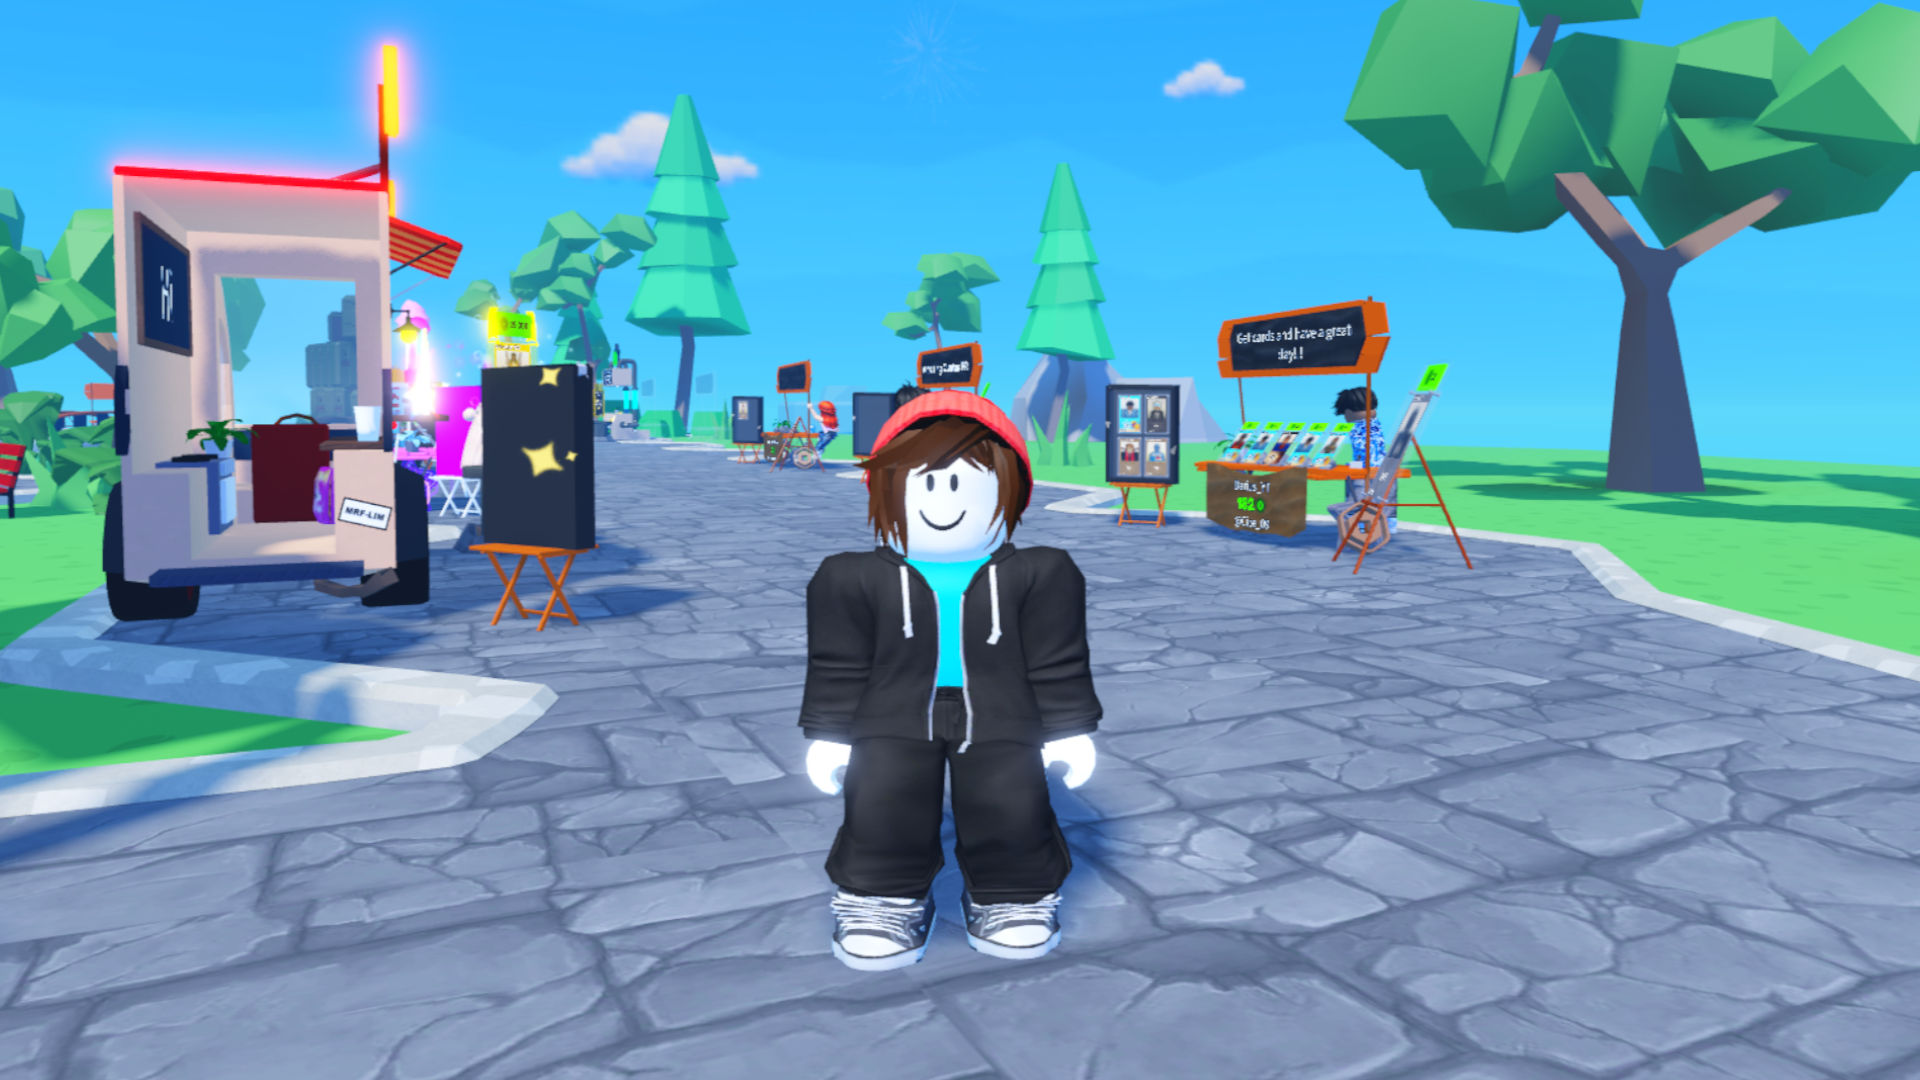 BUY ME TO GAIN YOUR FREE ROBUX - Roblox